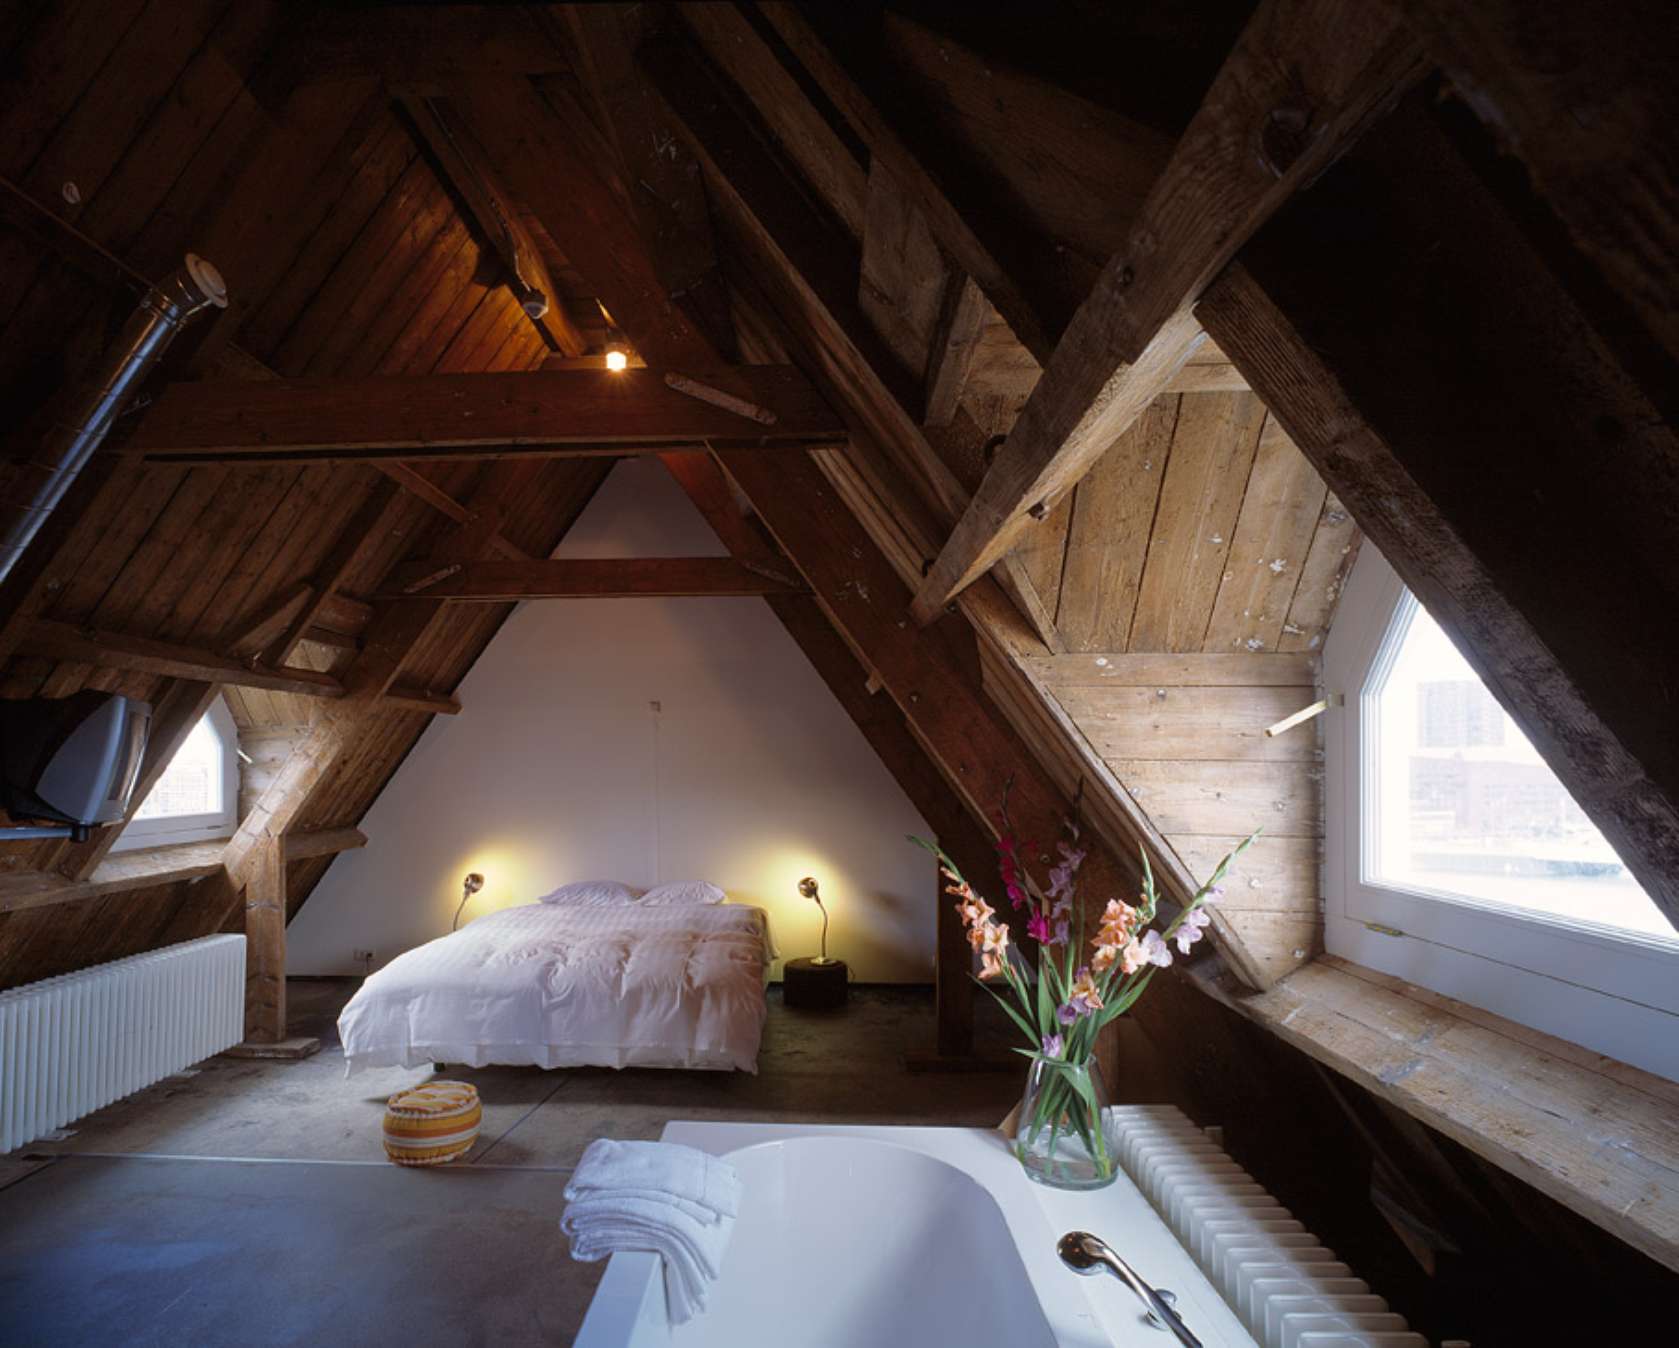 bedroom attic cool designs night roof pitched attics interior bed rustic beams dream rooms exposed wood windows suite wooden simple